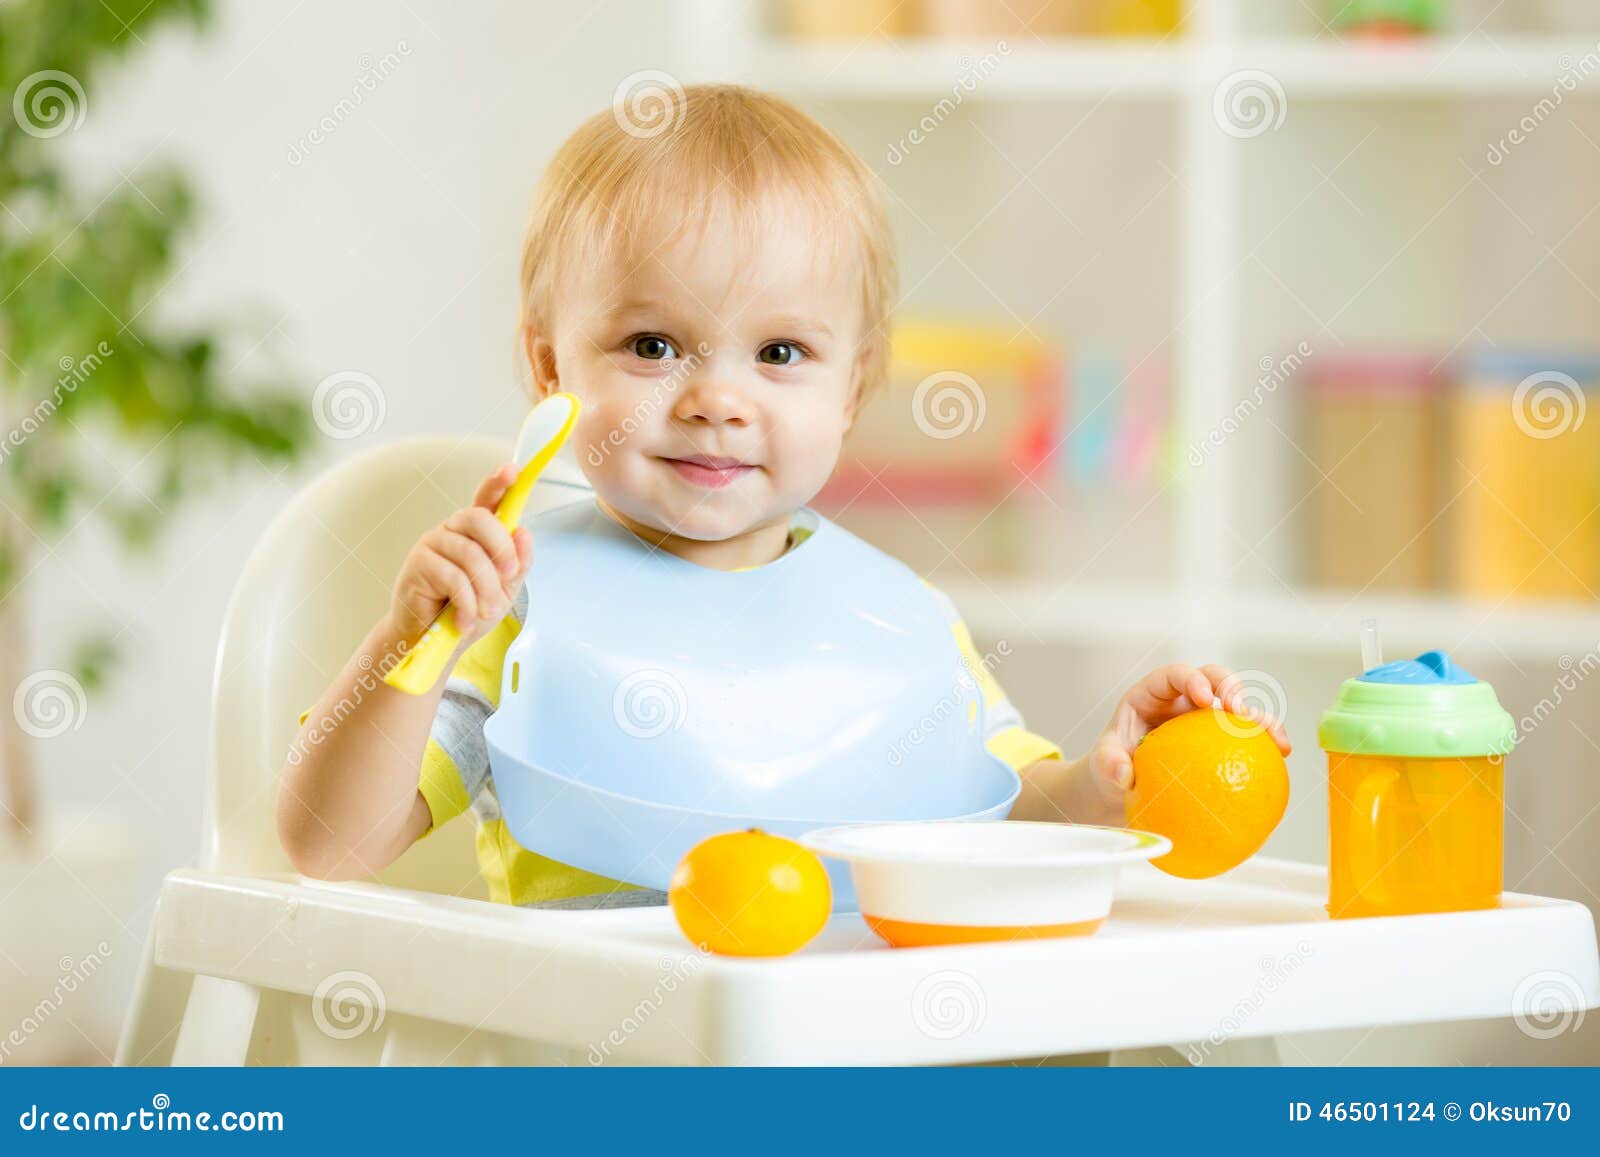 smiling baby child boy eating itself with spoon